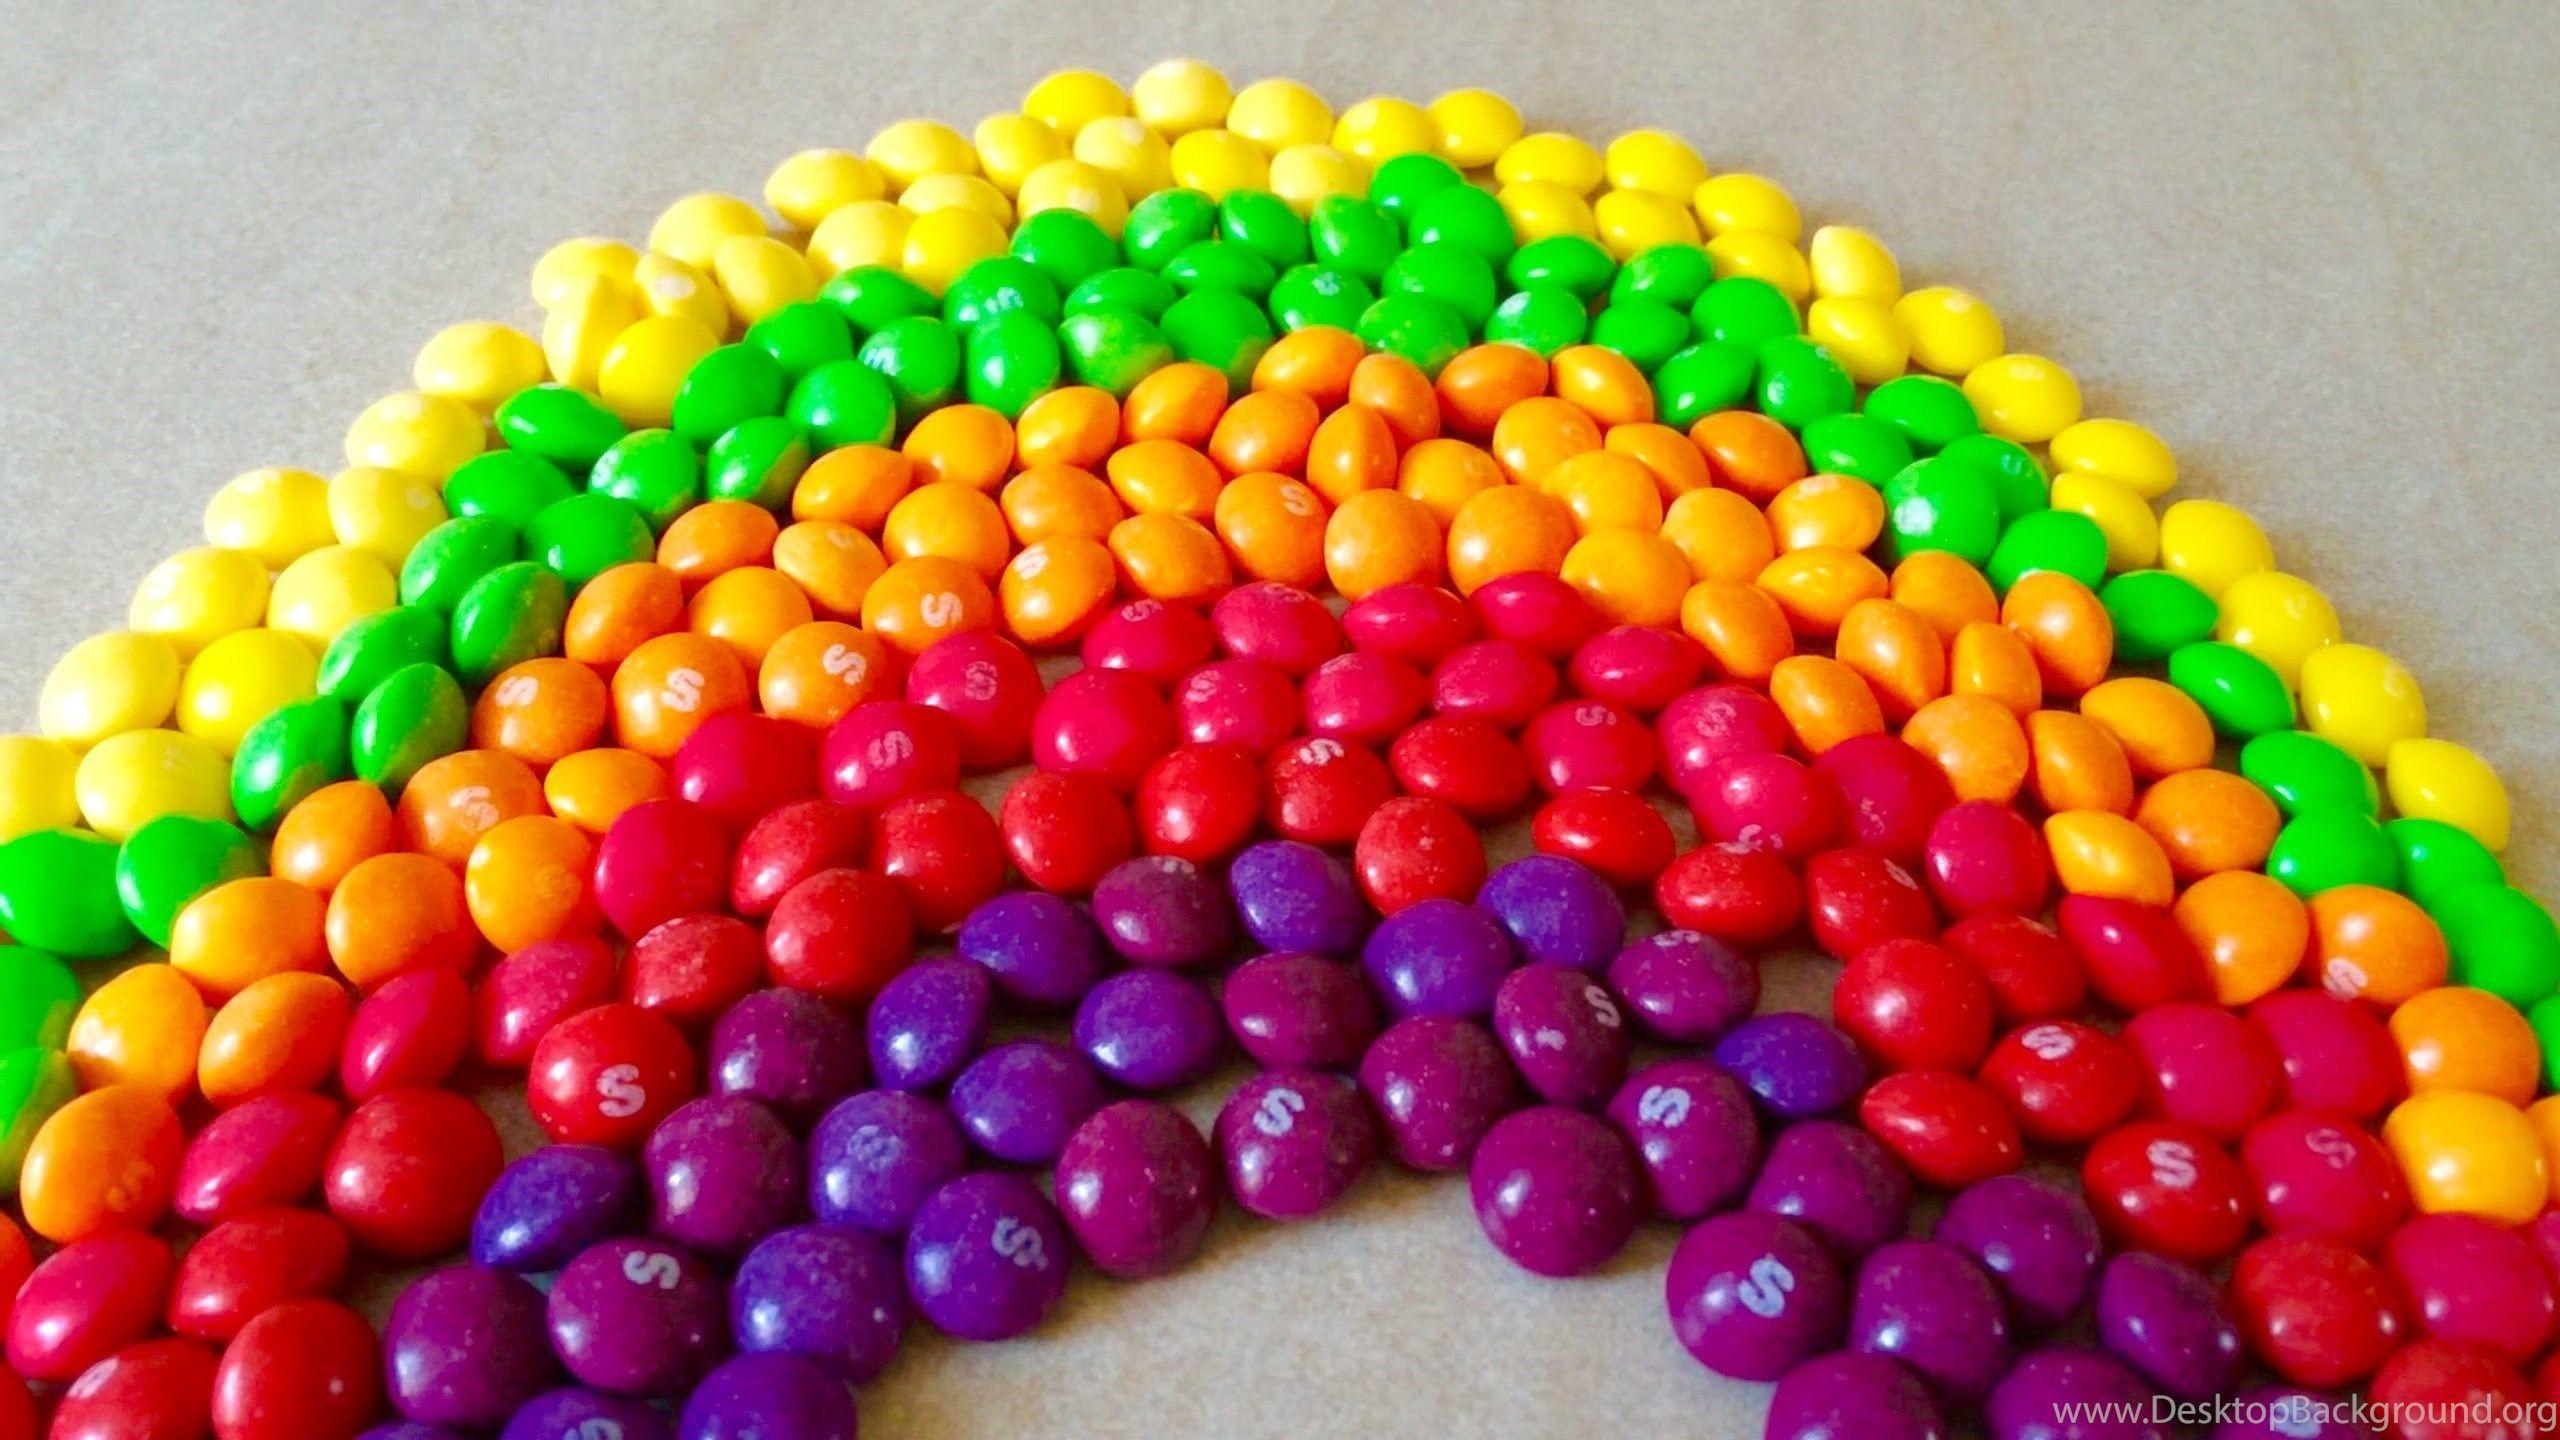 LEARN Colors With SKITTLES RAINBOW! YouTube Desktop Background